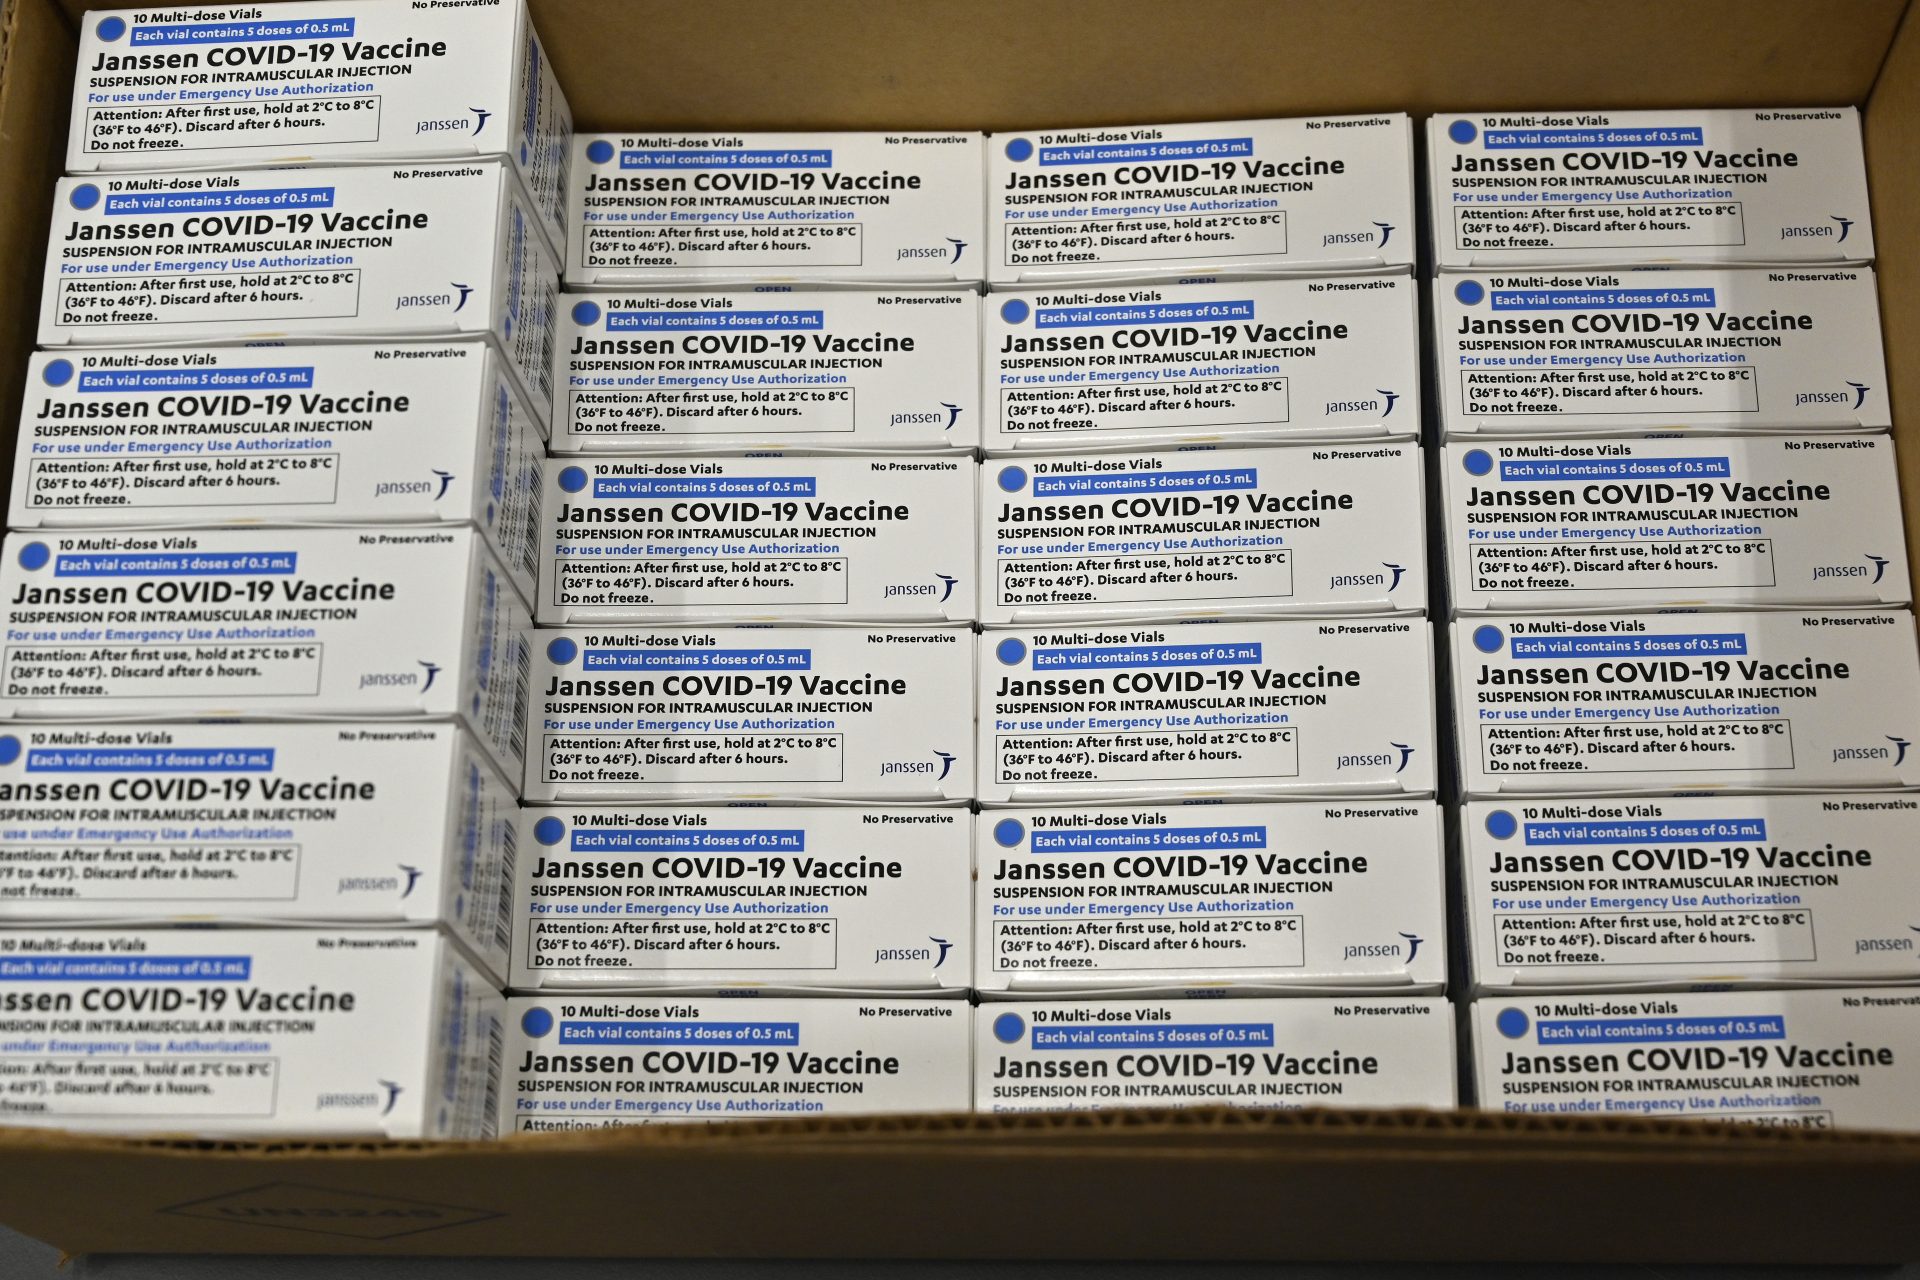 Boxes of the Johnson and Johnson COVID-19 vaccine are shown at the McKesson Corporation in Shepherdsville, Ky., Monday, March 1, 2021.